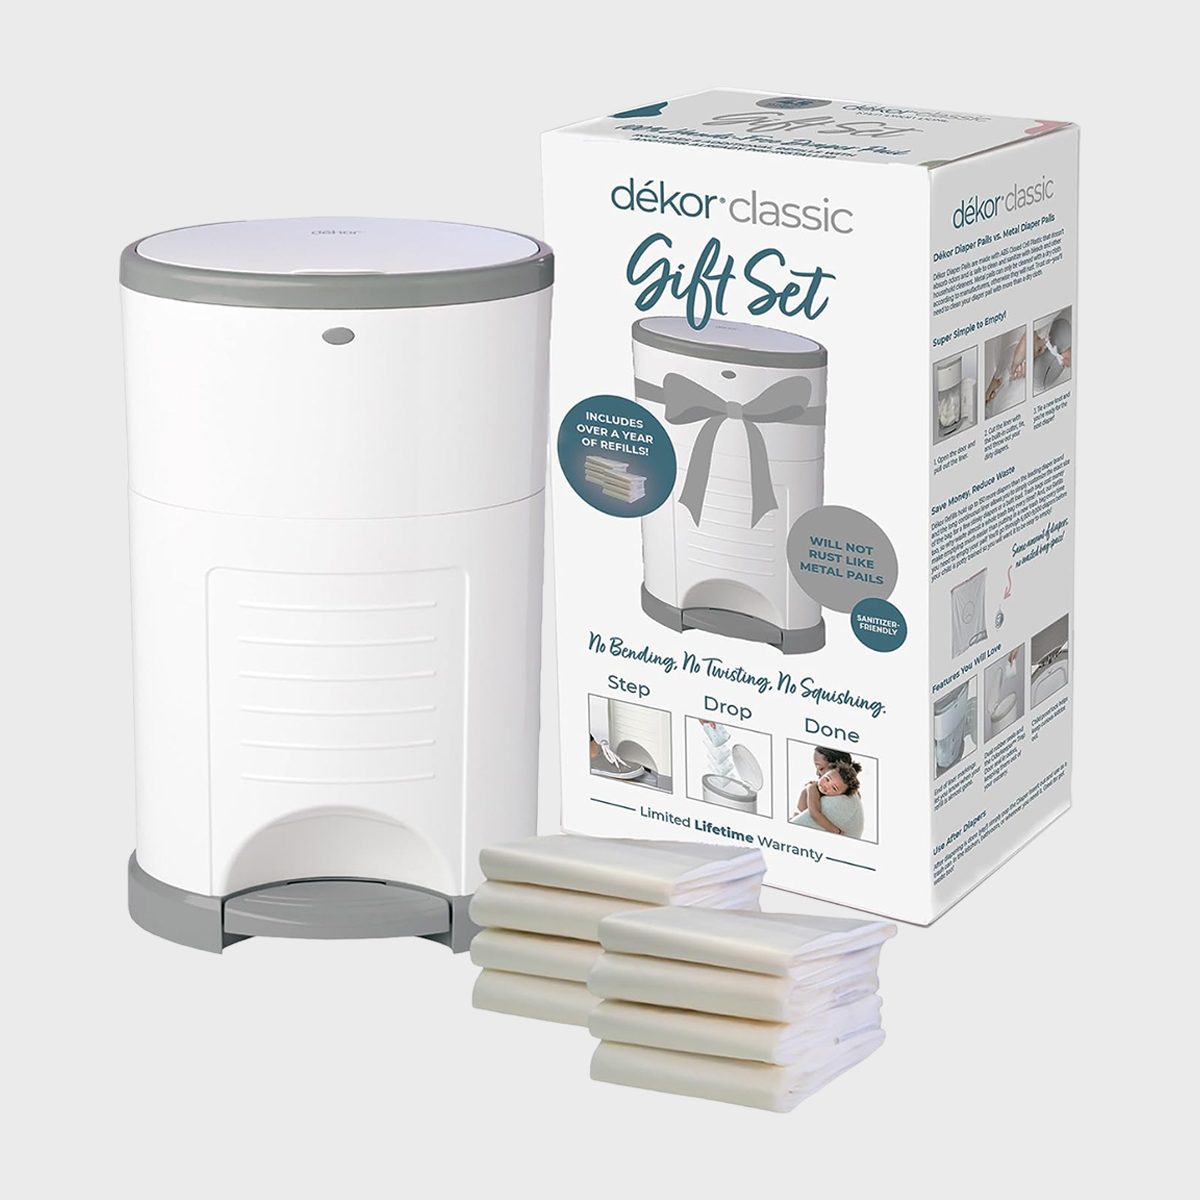 <p>Once the baby moves onto solid foods, watch out. Parents are going to want something to contain that smell. This <a href="https://www.amazon.com/D%C3%A9kor-Classic-Diaper-Pail-Gift/dp/B08TCDR8R2" rel="noopener noreferrer">diaper pail </a>features a large opening so parents don't have to reach in and shove down dirty diapers. It's step, drop and done.</p> <p>The pail features closed-cell ABS plastic which doesn't absorb odors and safely sanitizes with <a href="https://www.rd.com/article/the-most-trusted-cleaning-products-in-america/" rel="noopener noreferrer">household cleaners</a> including bleach. It's amazing how quickly the diapers pile up, so parents will really appreciate the fact that this gift set also comes with a year's worth of refill liners.</p> <p class="listicle-page__cta-button-shop"><a class="shop-btn" href="https://www.amazon.com/D%C3%A9kor-Classic-Diaper-Pail-Gift/dp/B08TCDR8R2">Shop Now</a></p>